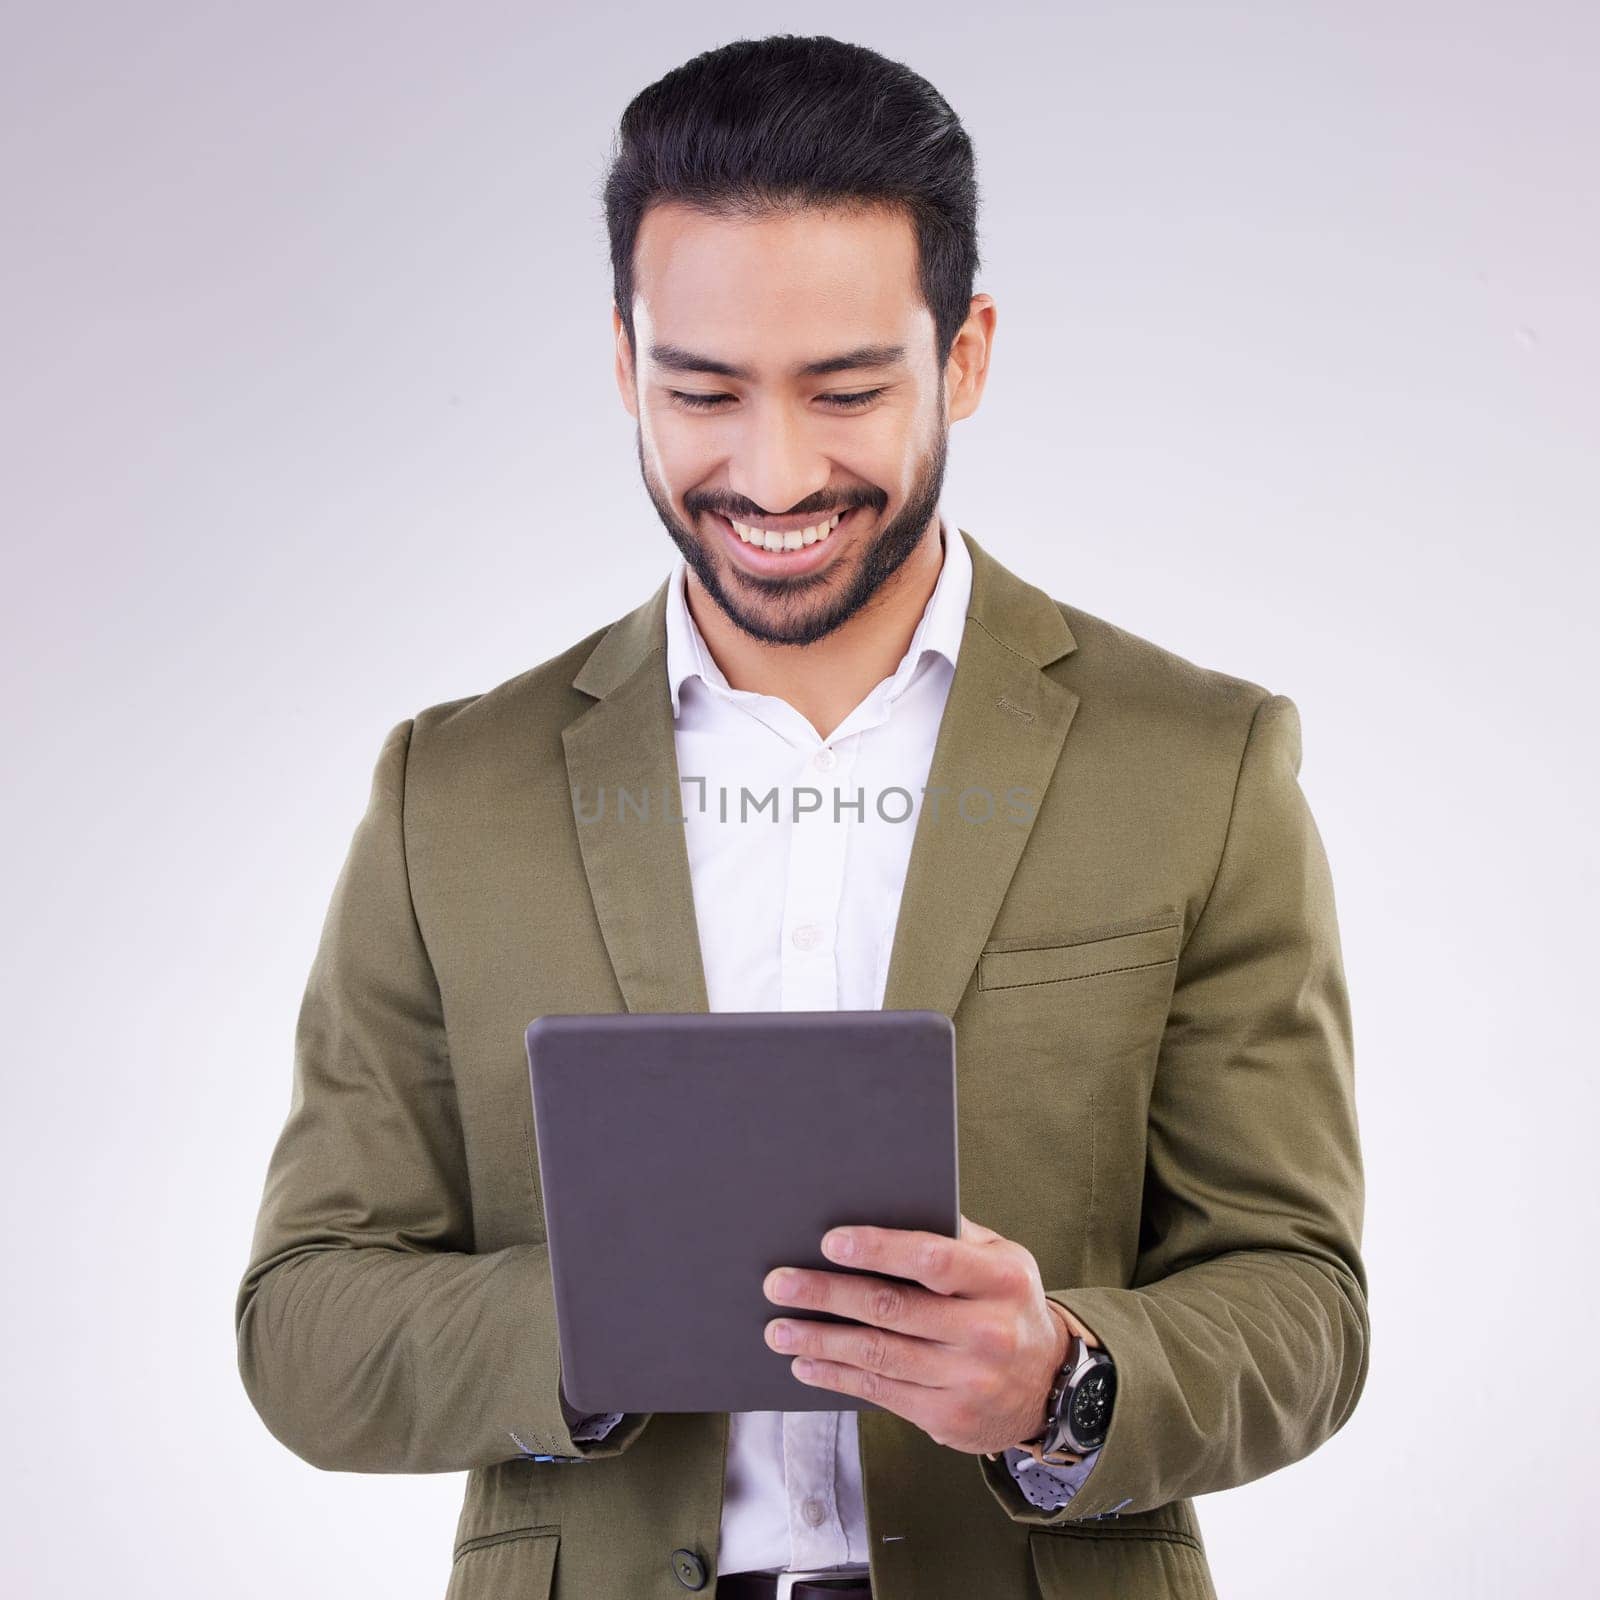 Business man, tablet and smile in studio for internet, communication and network connection. Entrepreneur male online for mobile app networking, social media or research on investment or sales.